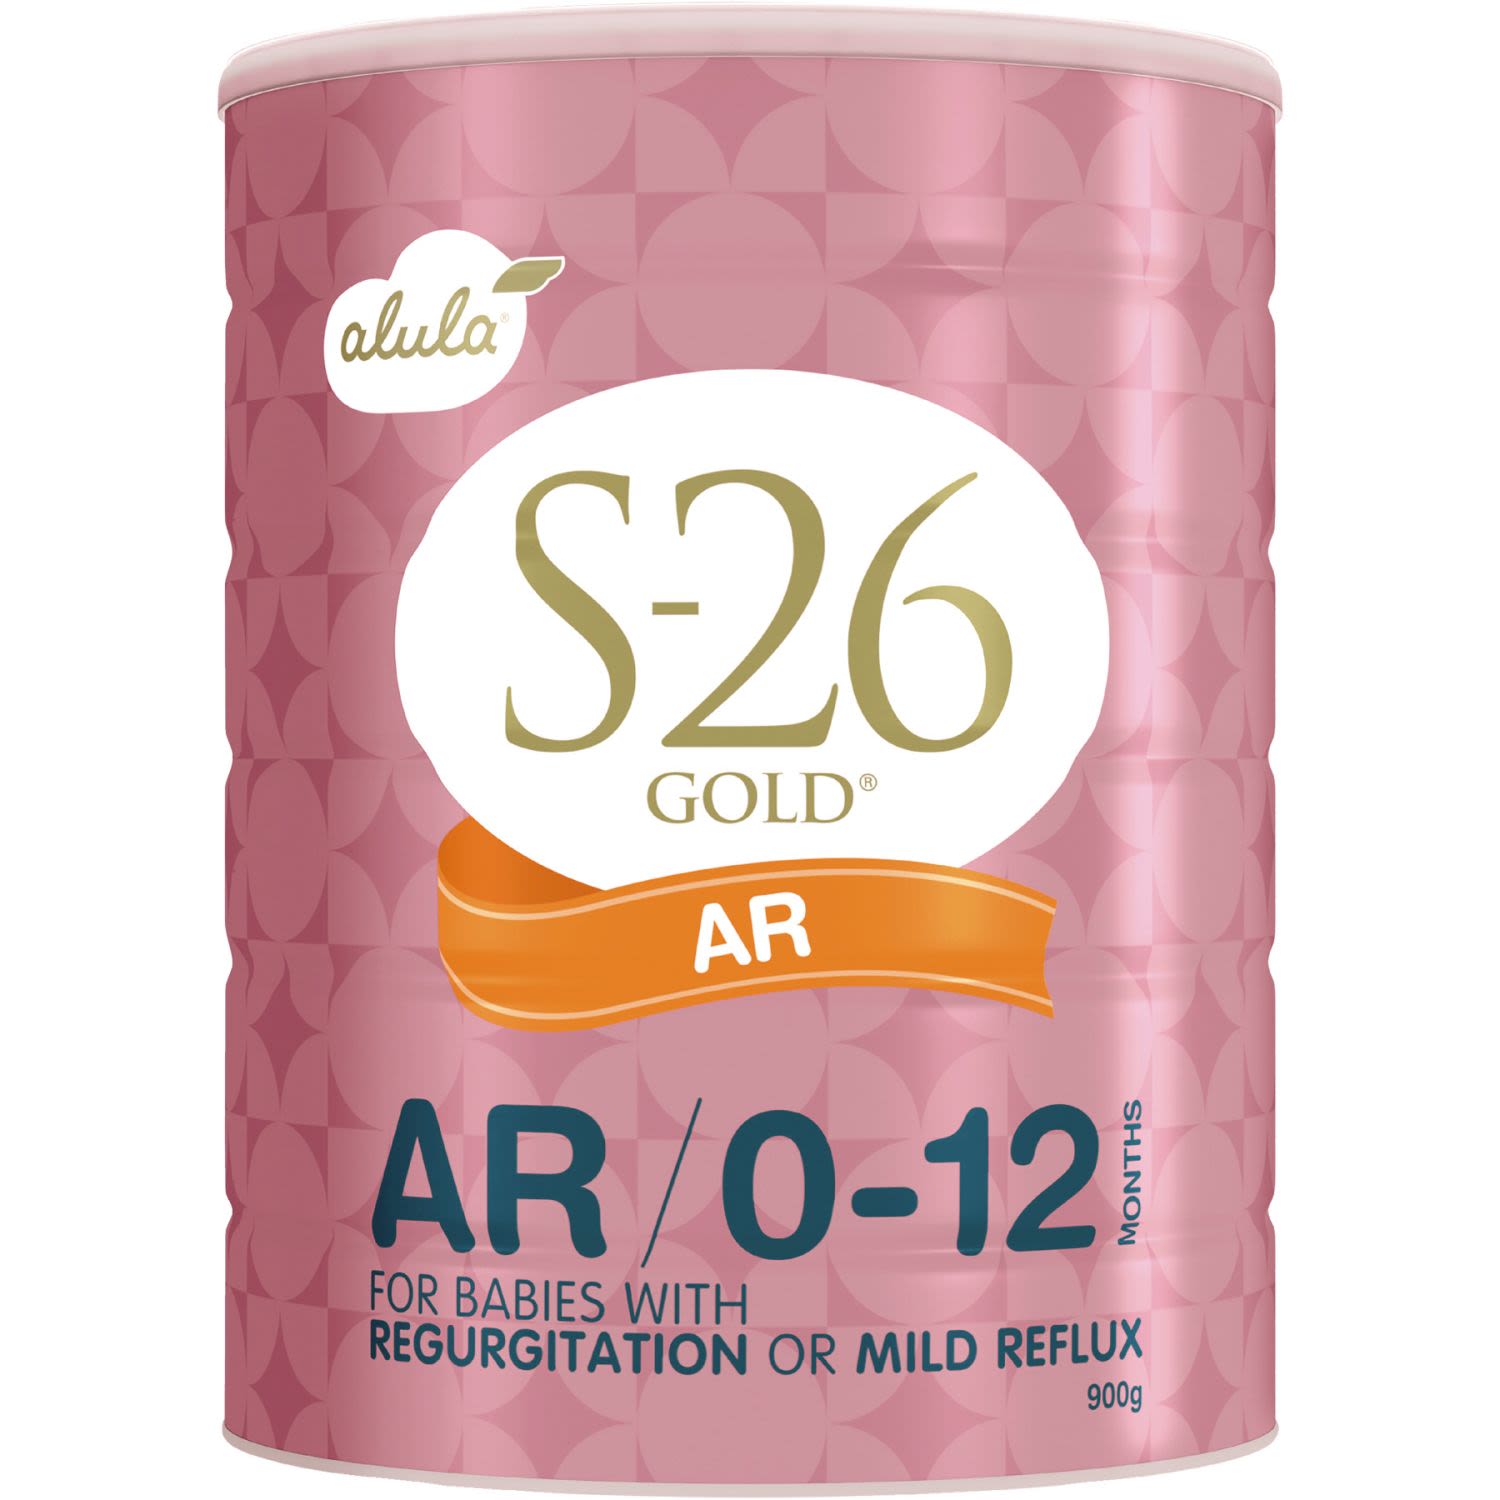 S-26 Alula Gold AR is a premium, nutritionally complete, specialty infant formula for babies from birth who have been diagnosed with regurgitation. Its ingredients include a digestible, pre-cooked corn starch that is tasteless, odourless, as well as thickens in the stomach and not in the bottle.

It continues to support your baby through the time when solids are being introduced at around 6 months, as a well-balanced diet is important.

As it is a specialty formula, consultation with a healthcare professional is recommended before use to ensure S-26 Alula GOLD AR is suitable for your baby.

S-26 Alula Gold AR must be prepared with boiled water that is COMPLETELY COOLED (20-25°C) or at room temperature. Cap bottle and SHAKE VIGOROUSLY (20-30 TIMES) to mix well. This should result in a thin liquid at room temperature.

An anti-colic or variable fast flow teat may work better with the S-26 Alula Gold AR.

Not suitable for general use and should be used under medical supervision.
<br /> <br /> <br /><br />Country of Origin: New Zealand